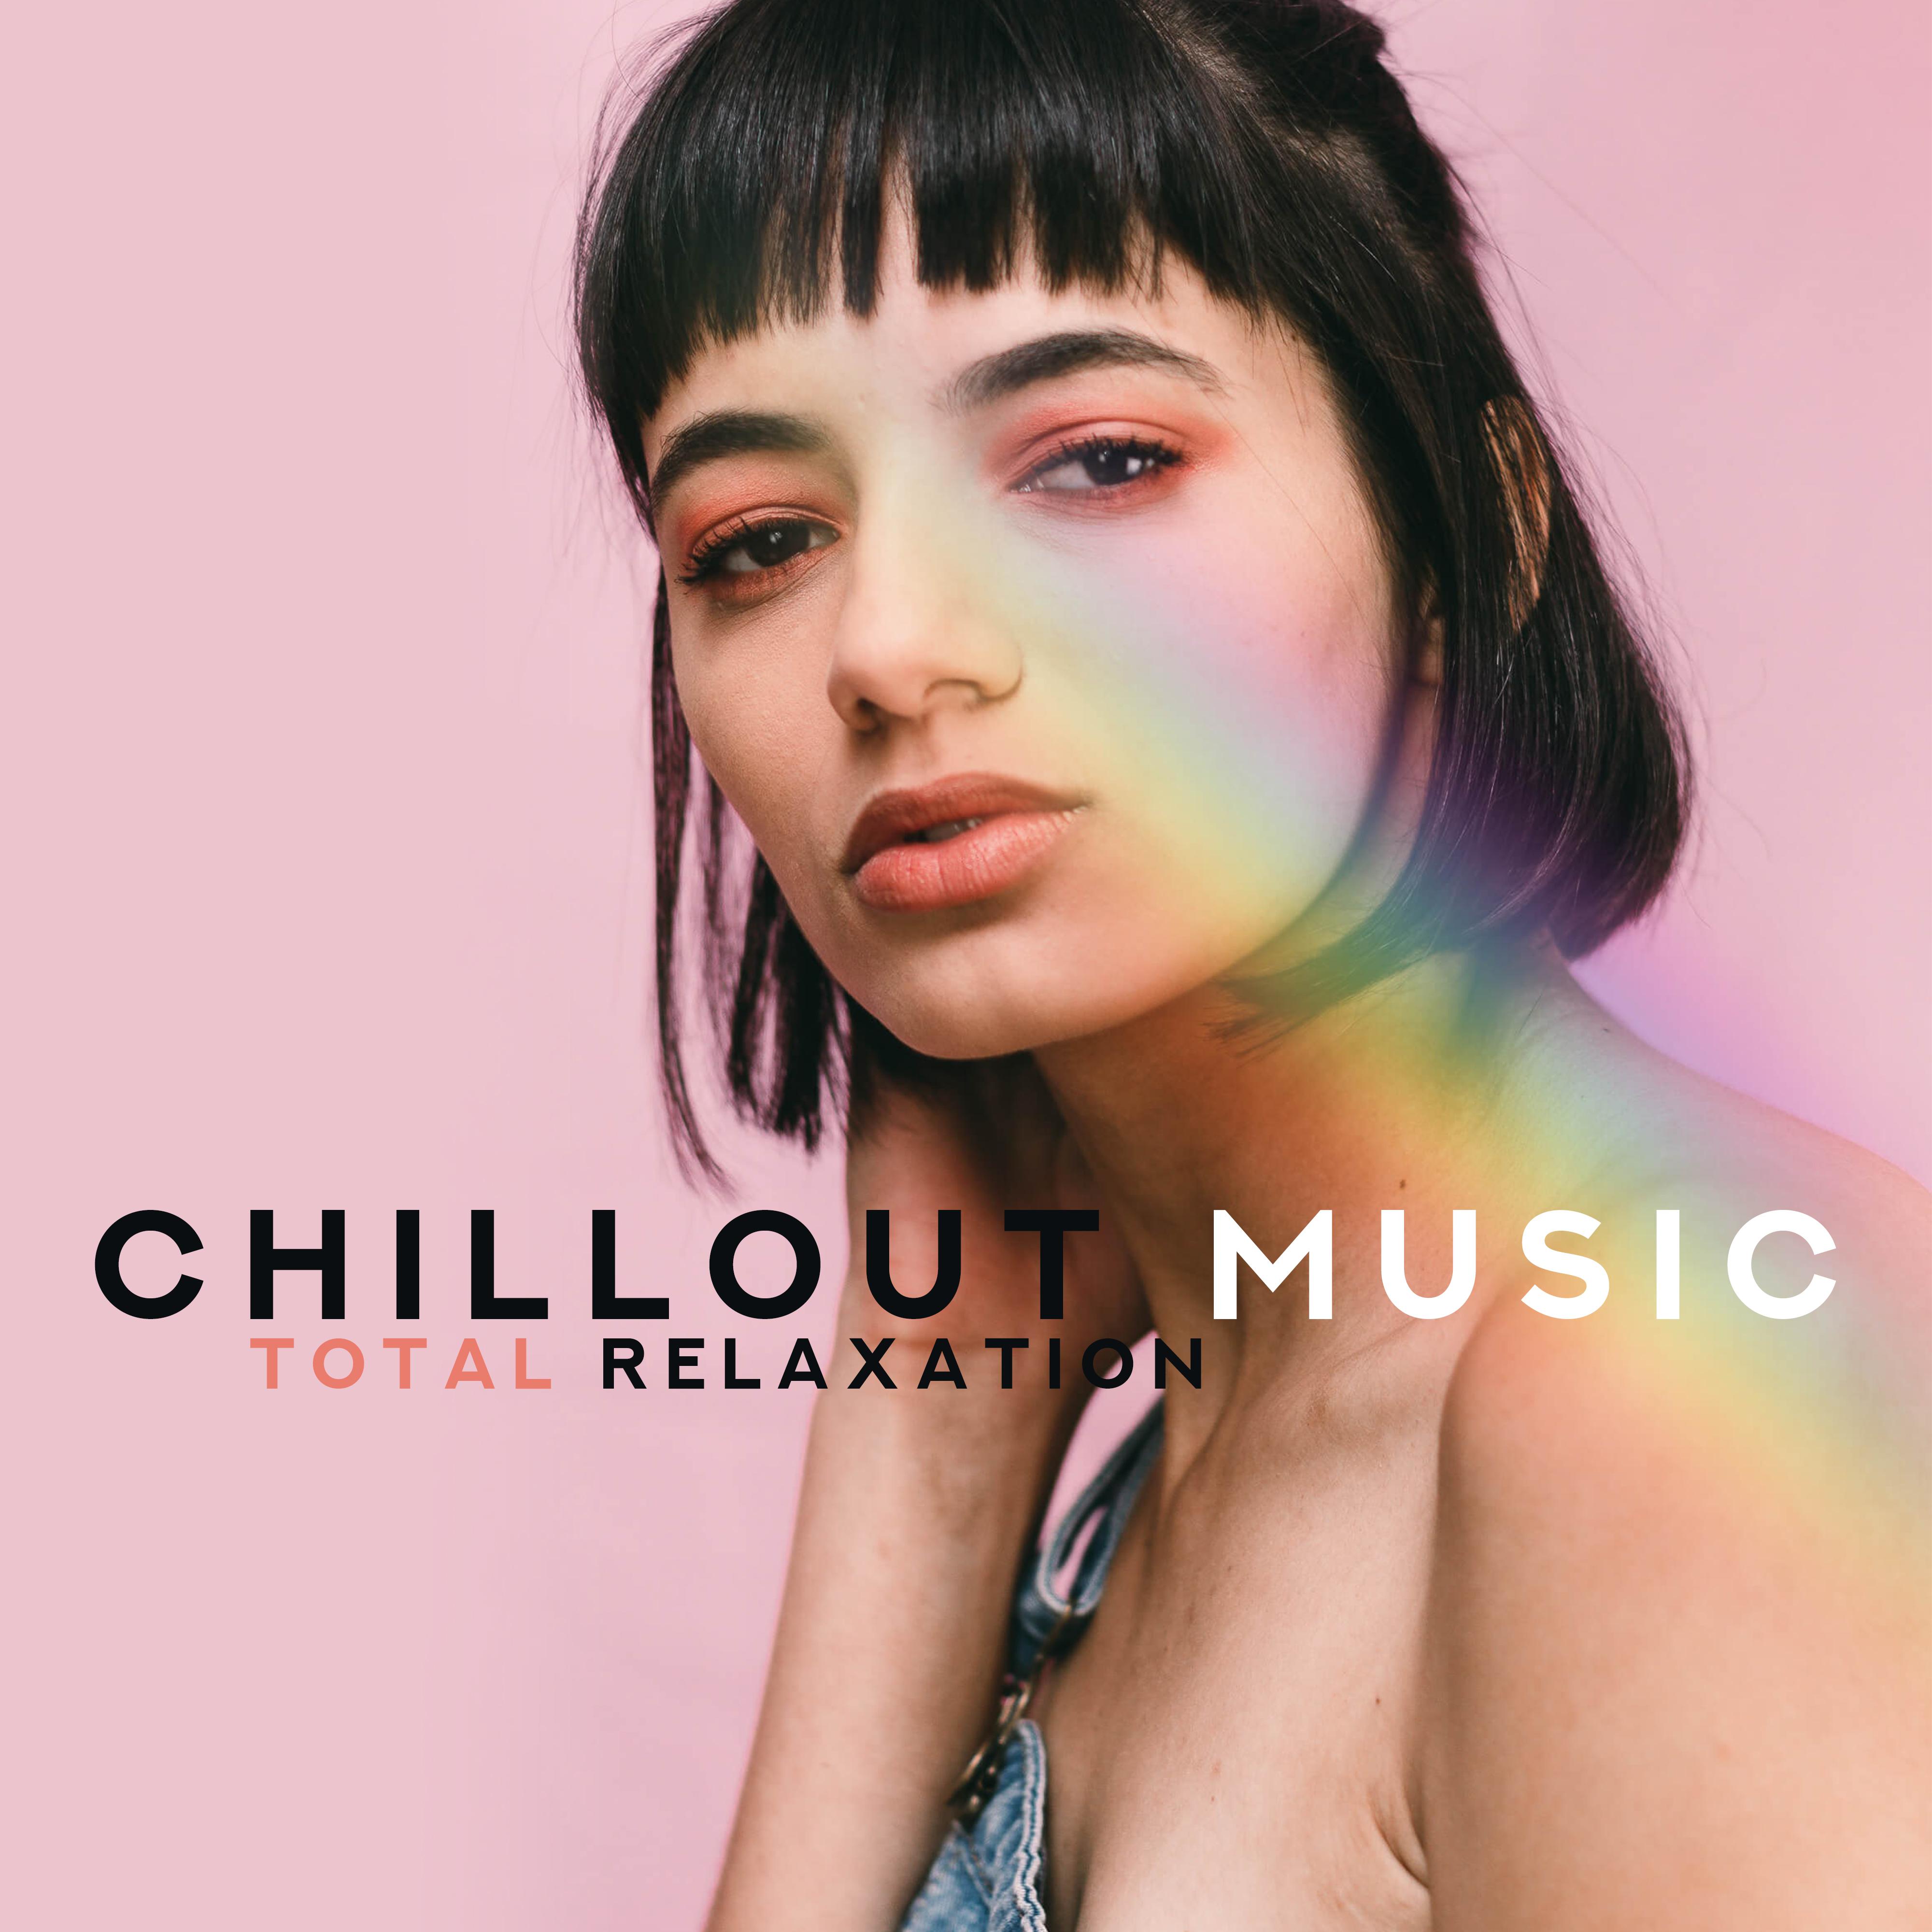 Chillout Music Total Relaxation: Selection of Most Relaxing 2019 Chill Out Songs, Soft Melodies, Internal Calm & Stress Reduction